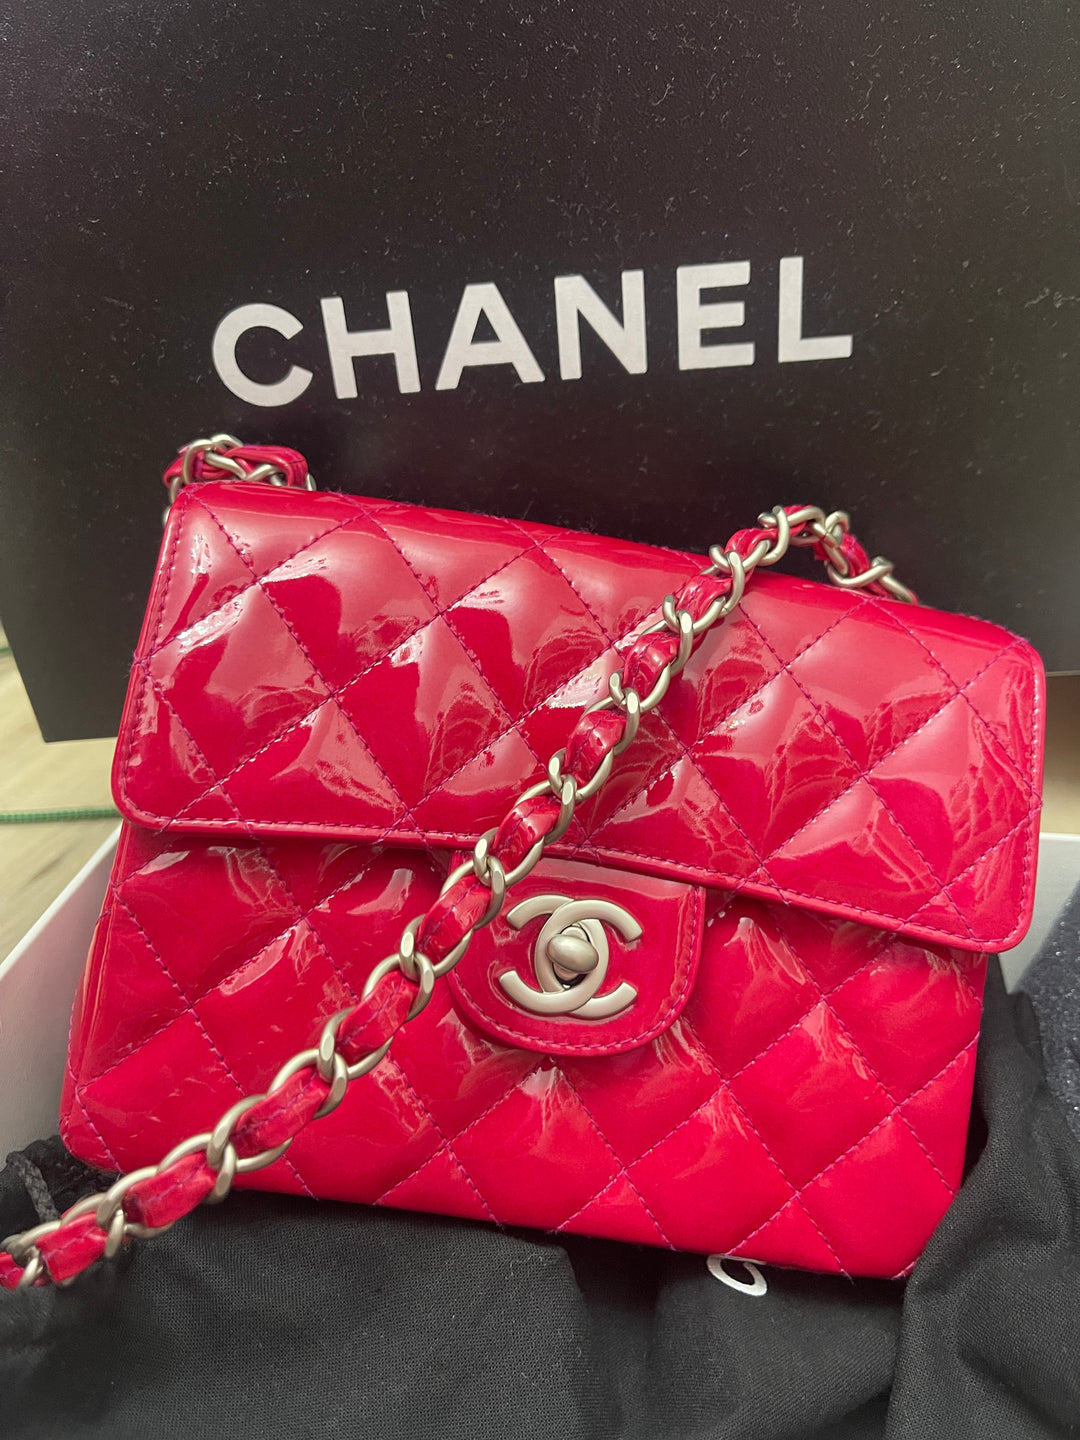 CHANEL – TheLuxeLouis